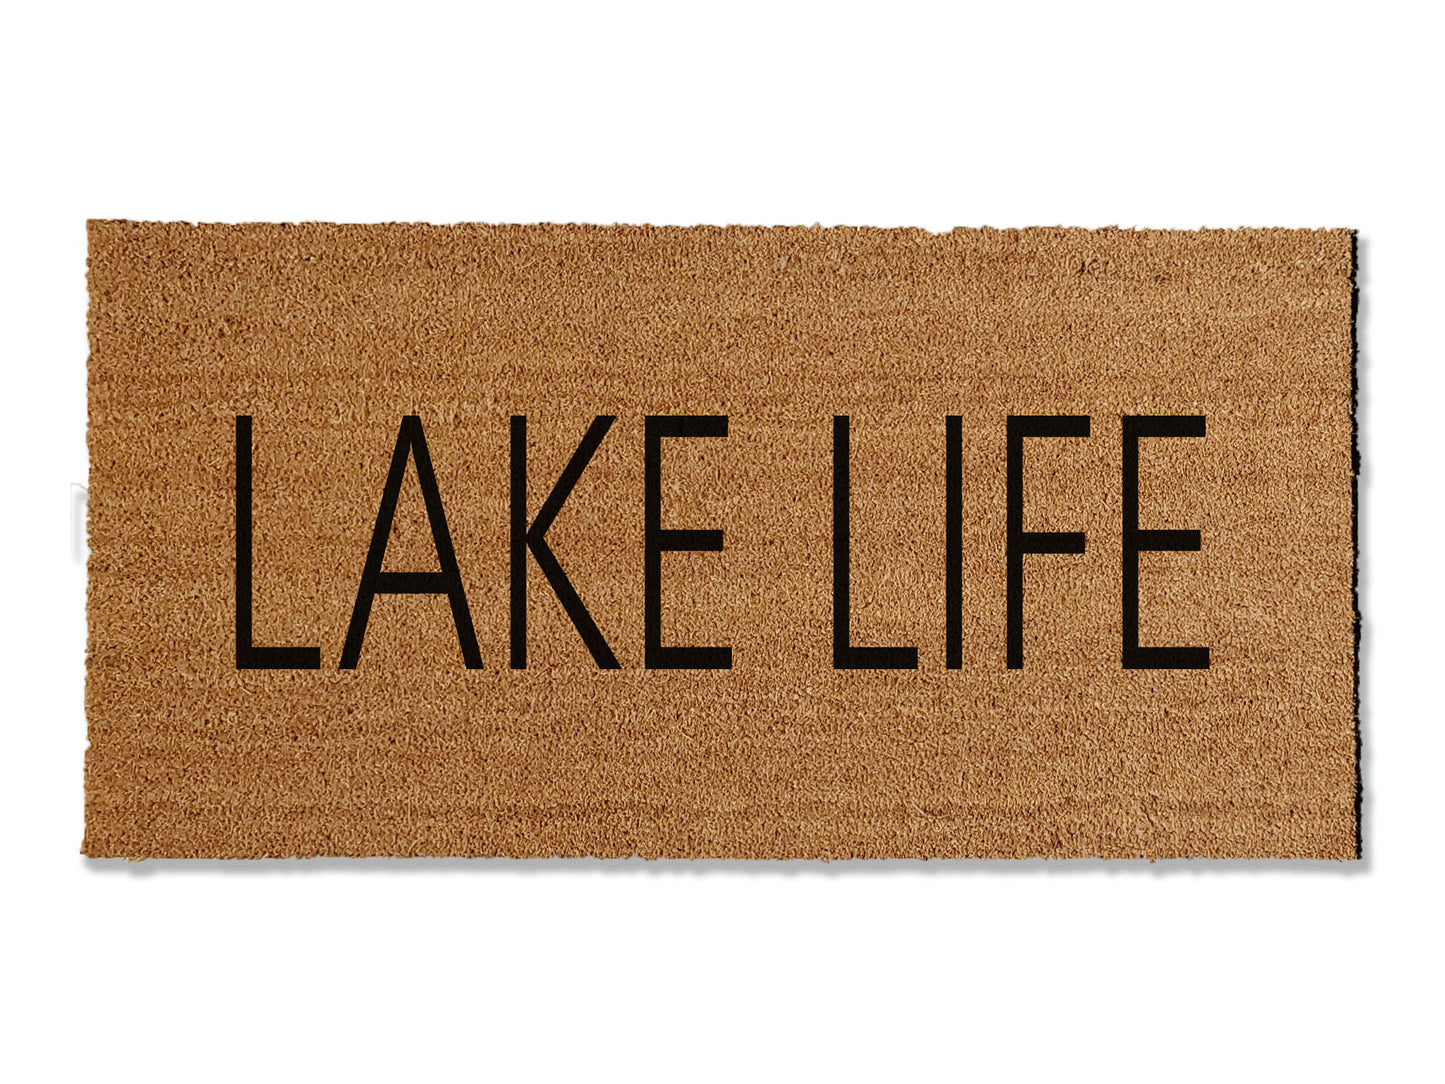 Welcome guests to the perfect lake house with our themed doormat that reads 'LAKE LIFE.' Available in multiple sizes, this doormat combines style and functionality, effectively trapping dirt to keep your lake retreat clean and inviting.